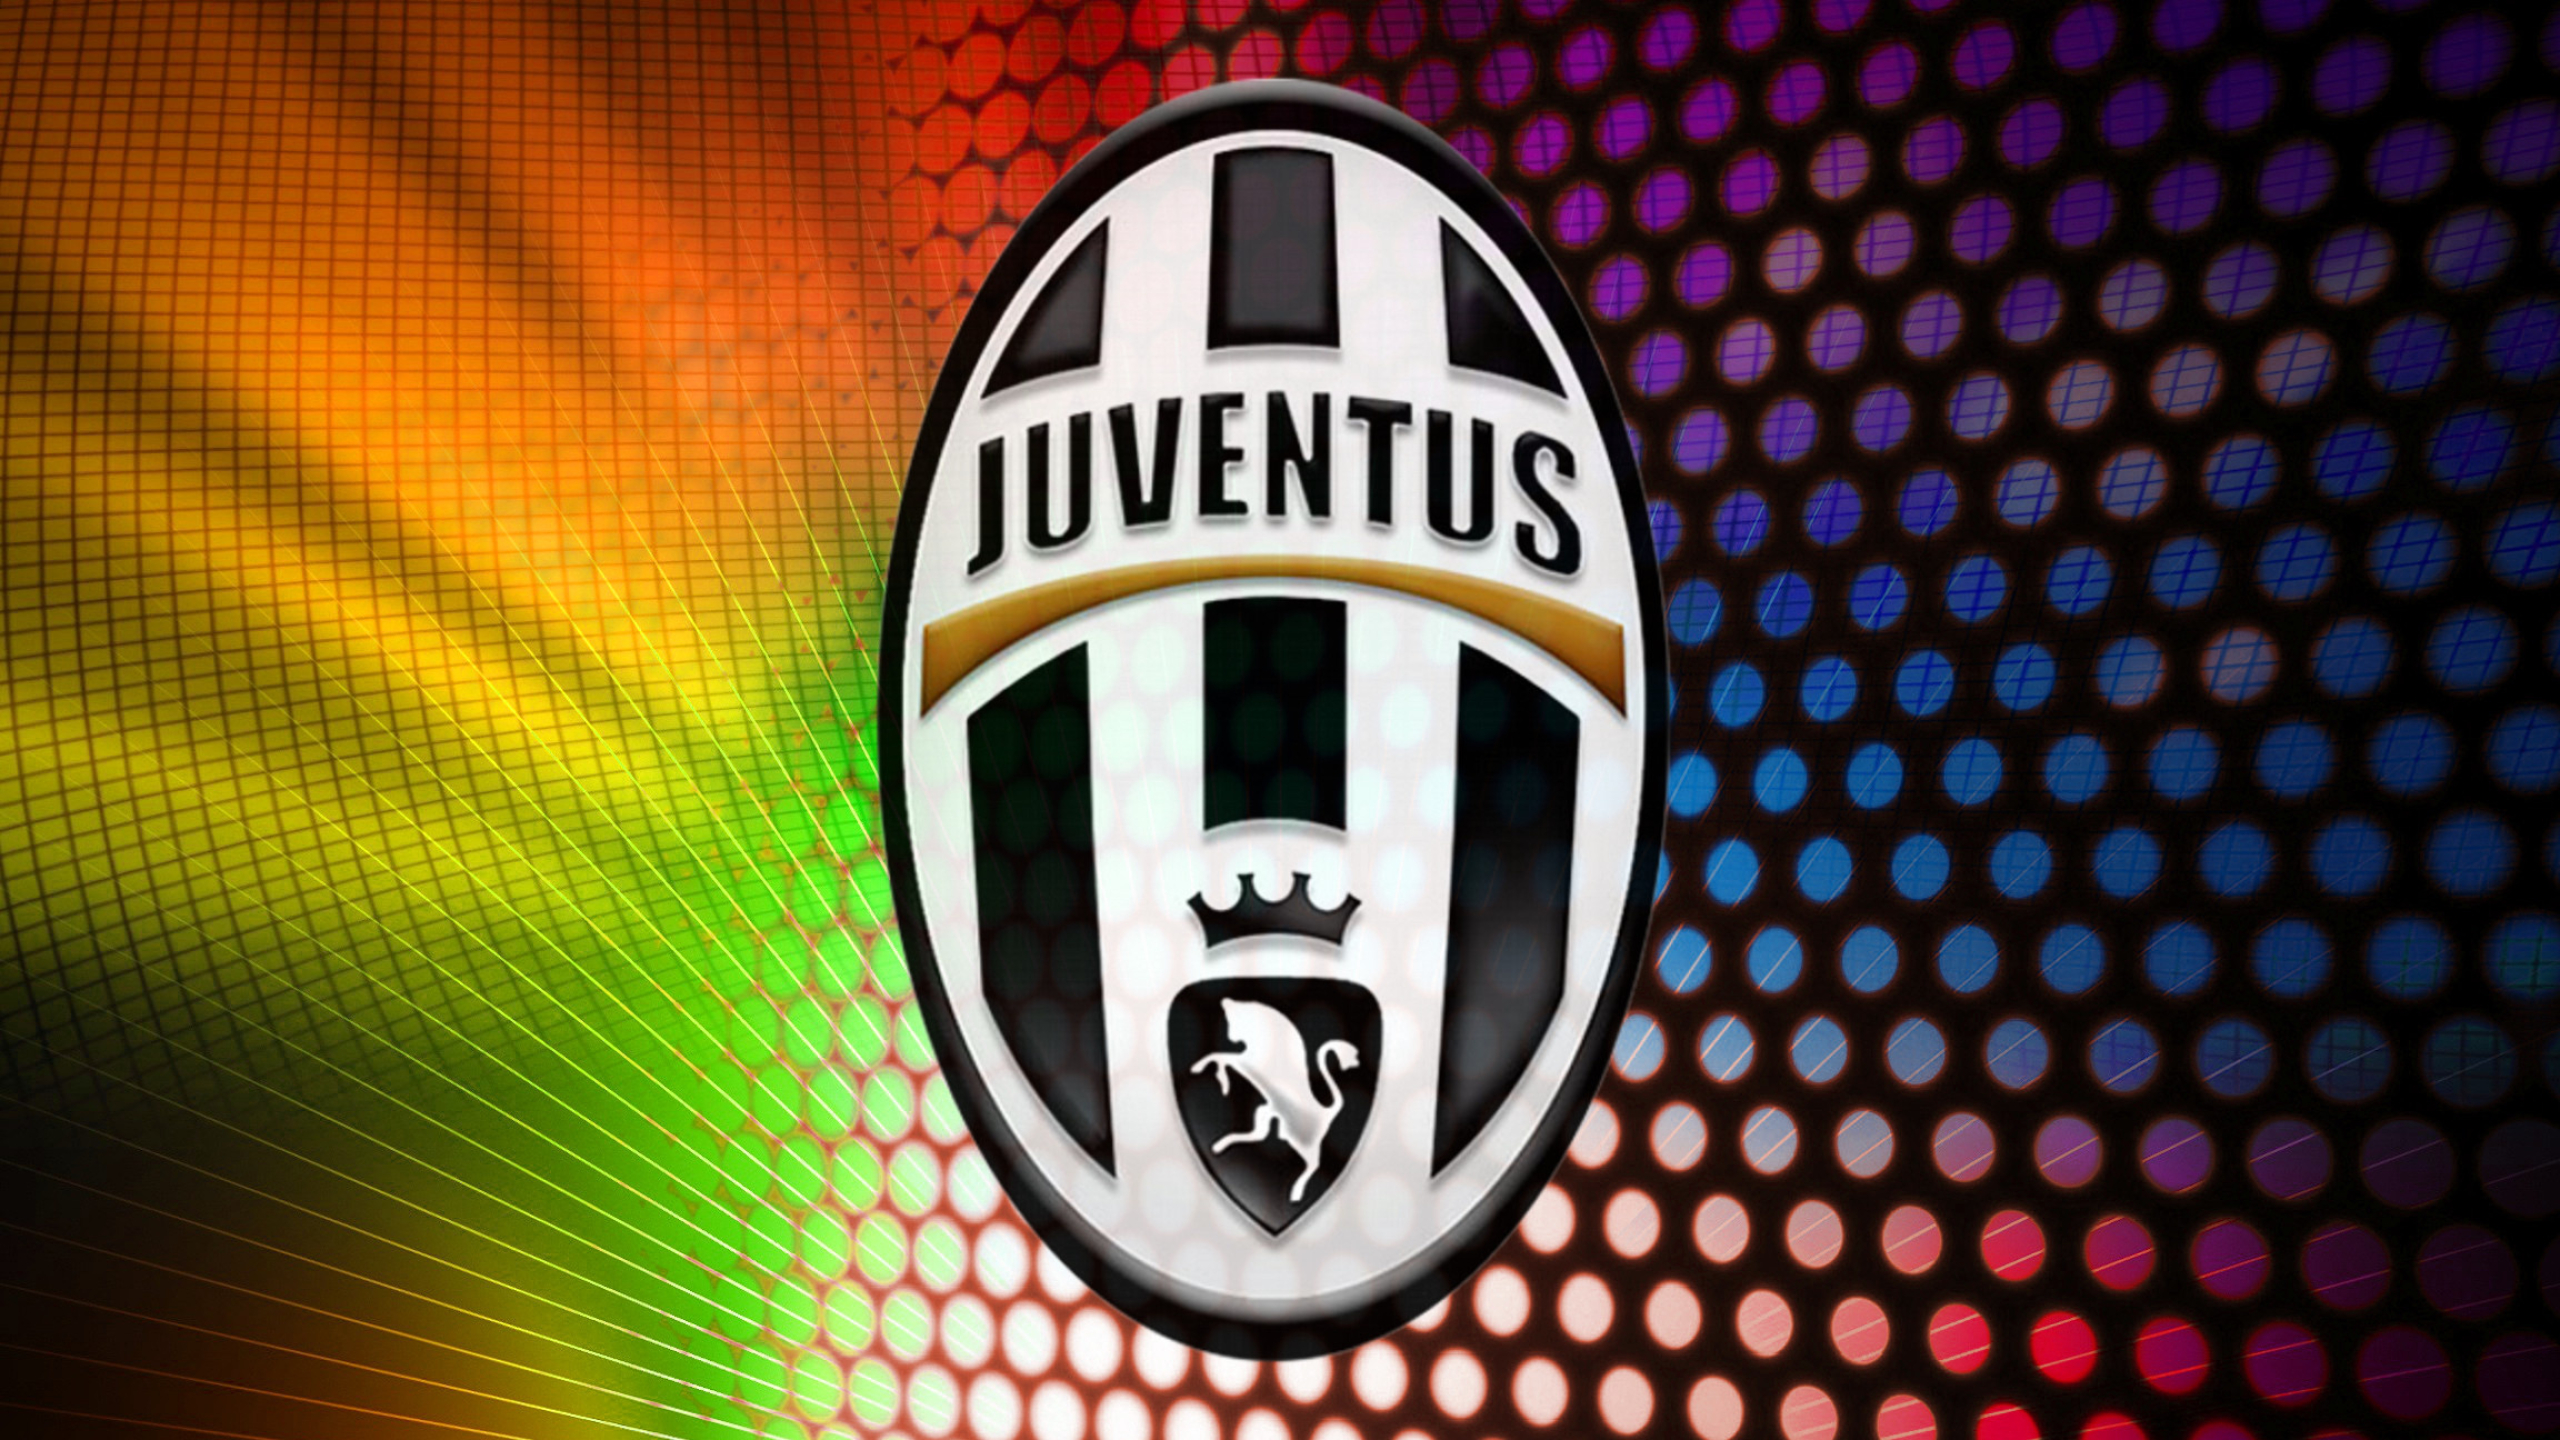 Juventus: The team, Founded in 1897 by a group of grammar school students. 2560x1440 HD Wallpaper.